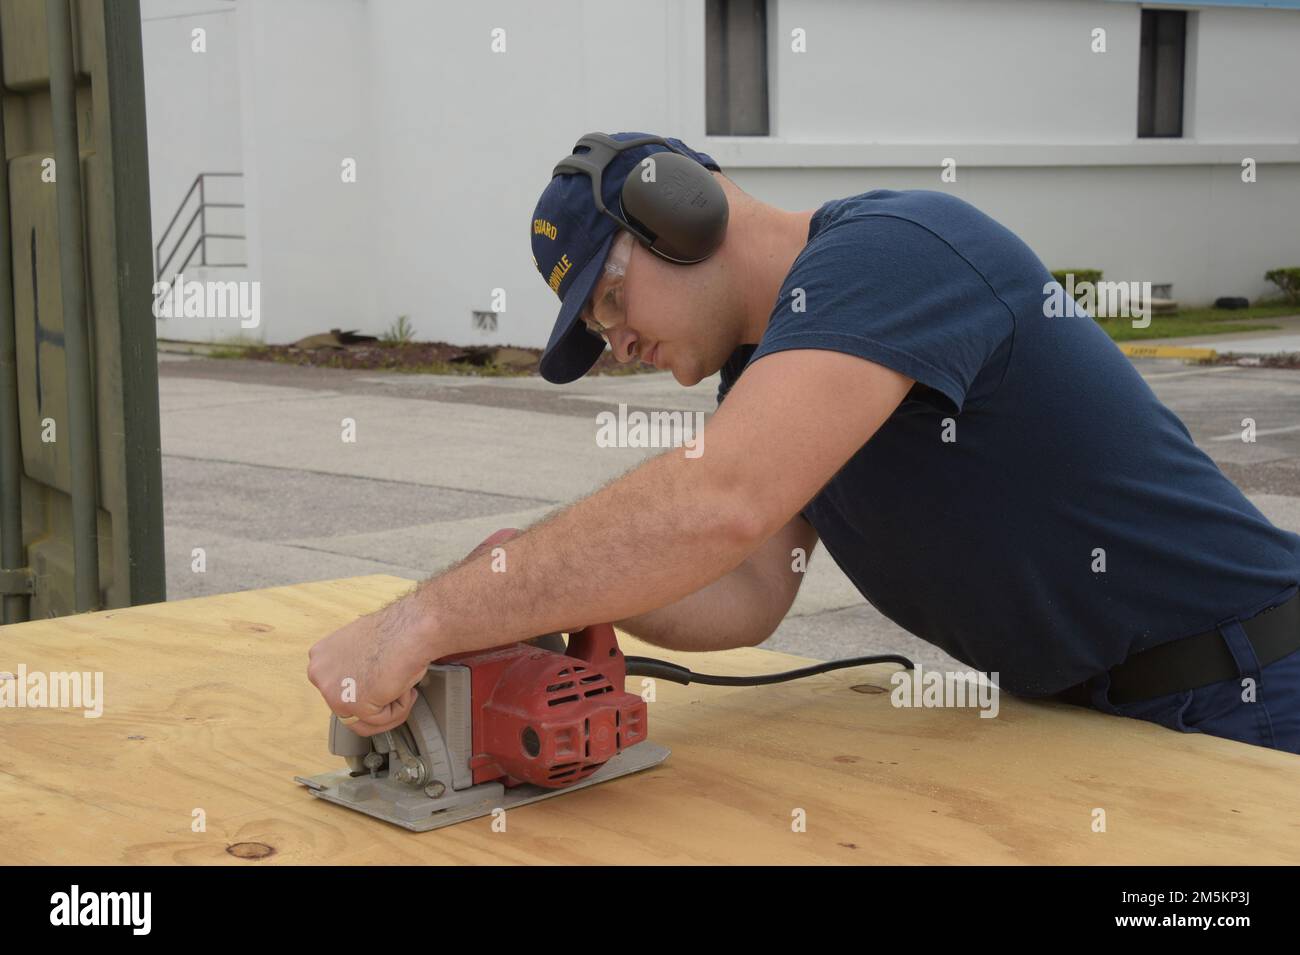 U.S. Coast Guard Petty Officer 3rd Class Hunter Parker, a damage controlman assigned to Sector Jacksonville, Florida, cuts a piece of plywood to use in the construction of a portable restroom facility being built at Sector Jacksonville, March 23, 2022. The portable restroom can be shipped to a location within the Sector Jacksonville area of responsibility where permanent restrooms are unavailable. Stock Photo